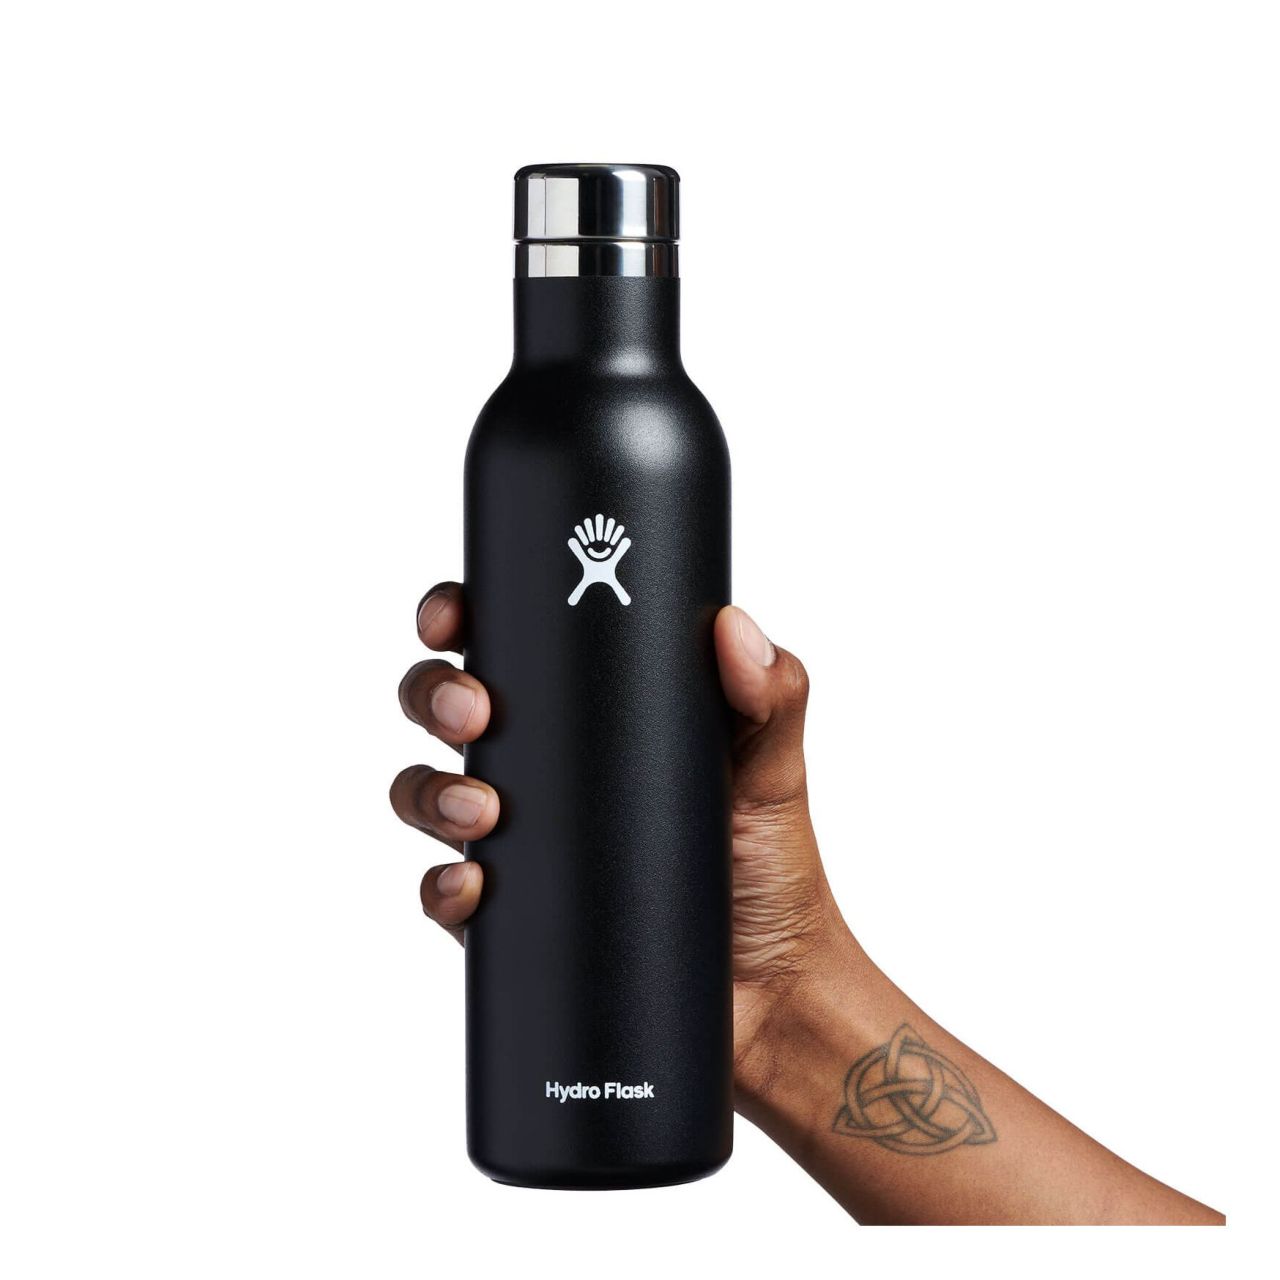  Hydro Flask Wine Tumbler & Bottle - Insulated Alcohol